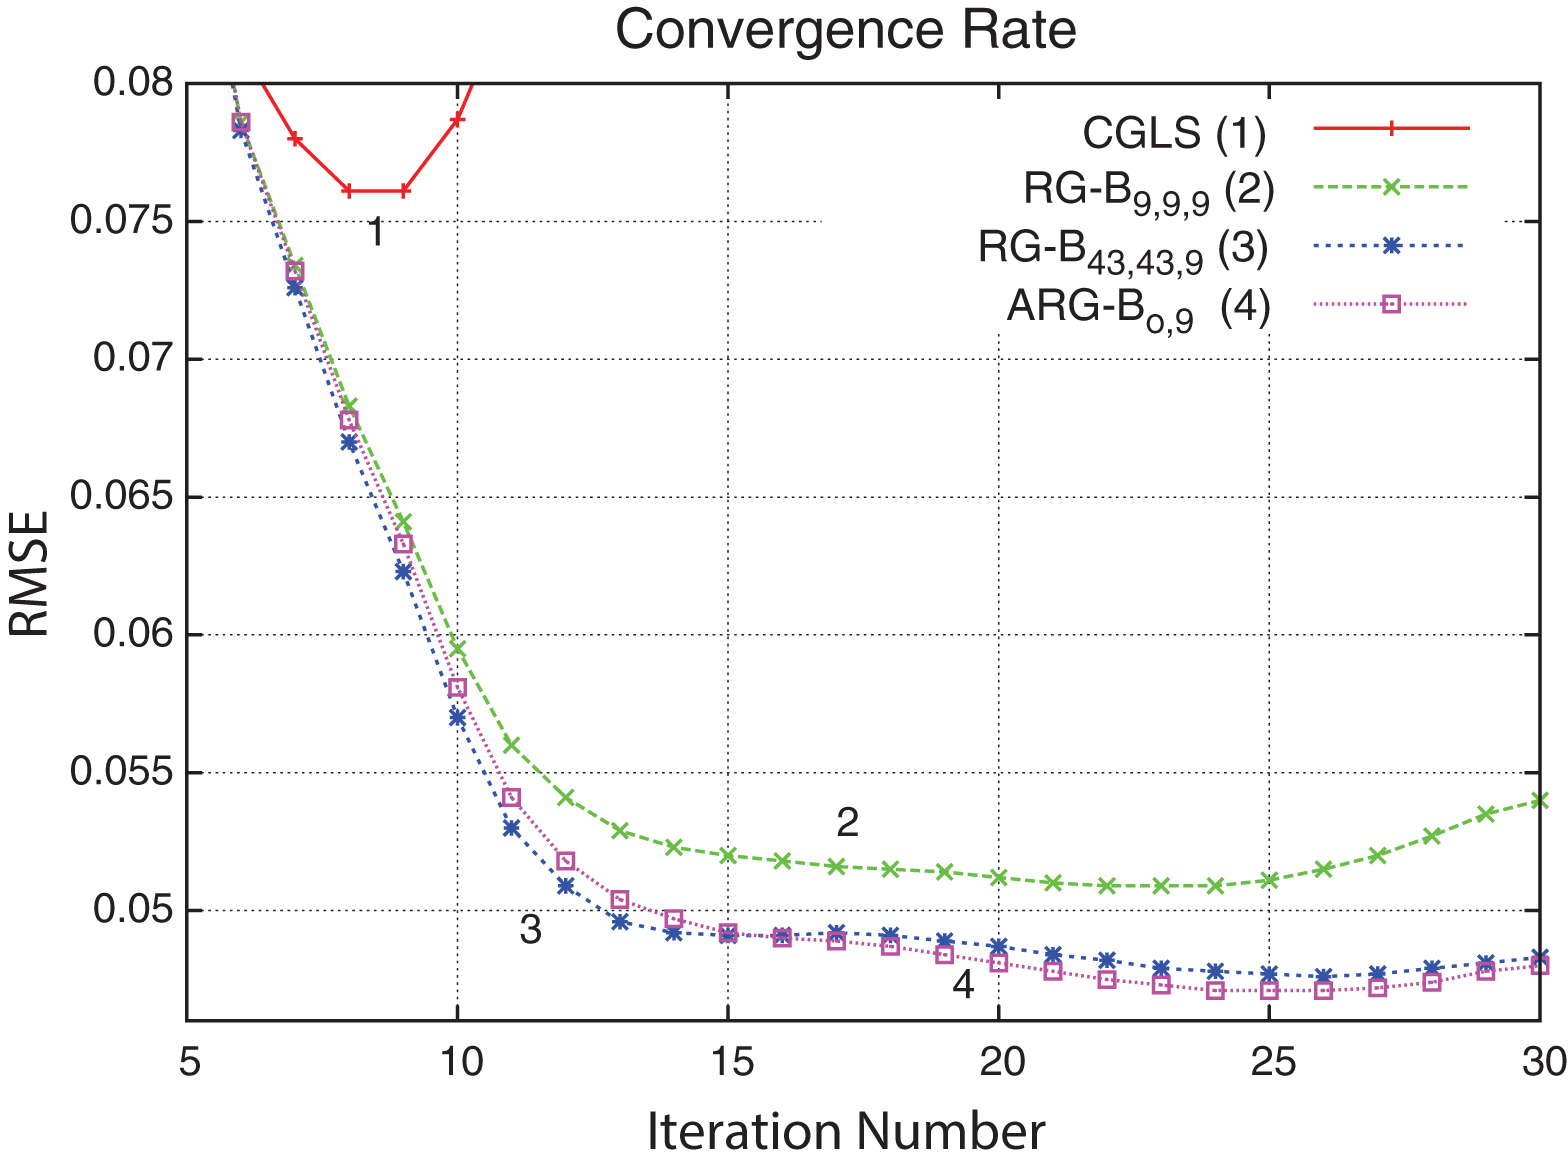 Convergence rate shown for four methods (see Fig. 4). Notably, the CGLS method diverges quickly after 7 iterations while the regularized methods reach semi-convergence point (approximately on the 25th iteration) and then diverge (both RG-B43, 43, 9 and ARG-Bo,9 methods diverge much slower than the RG-B9, 9, 9 method).